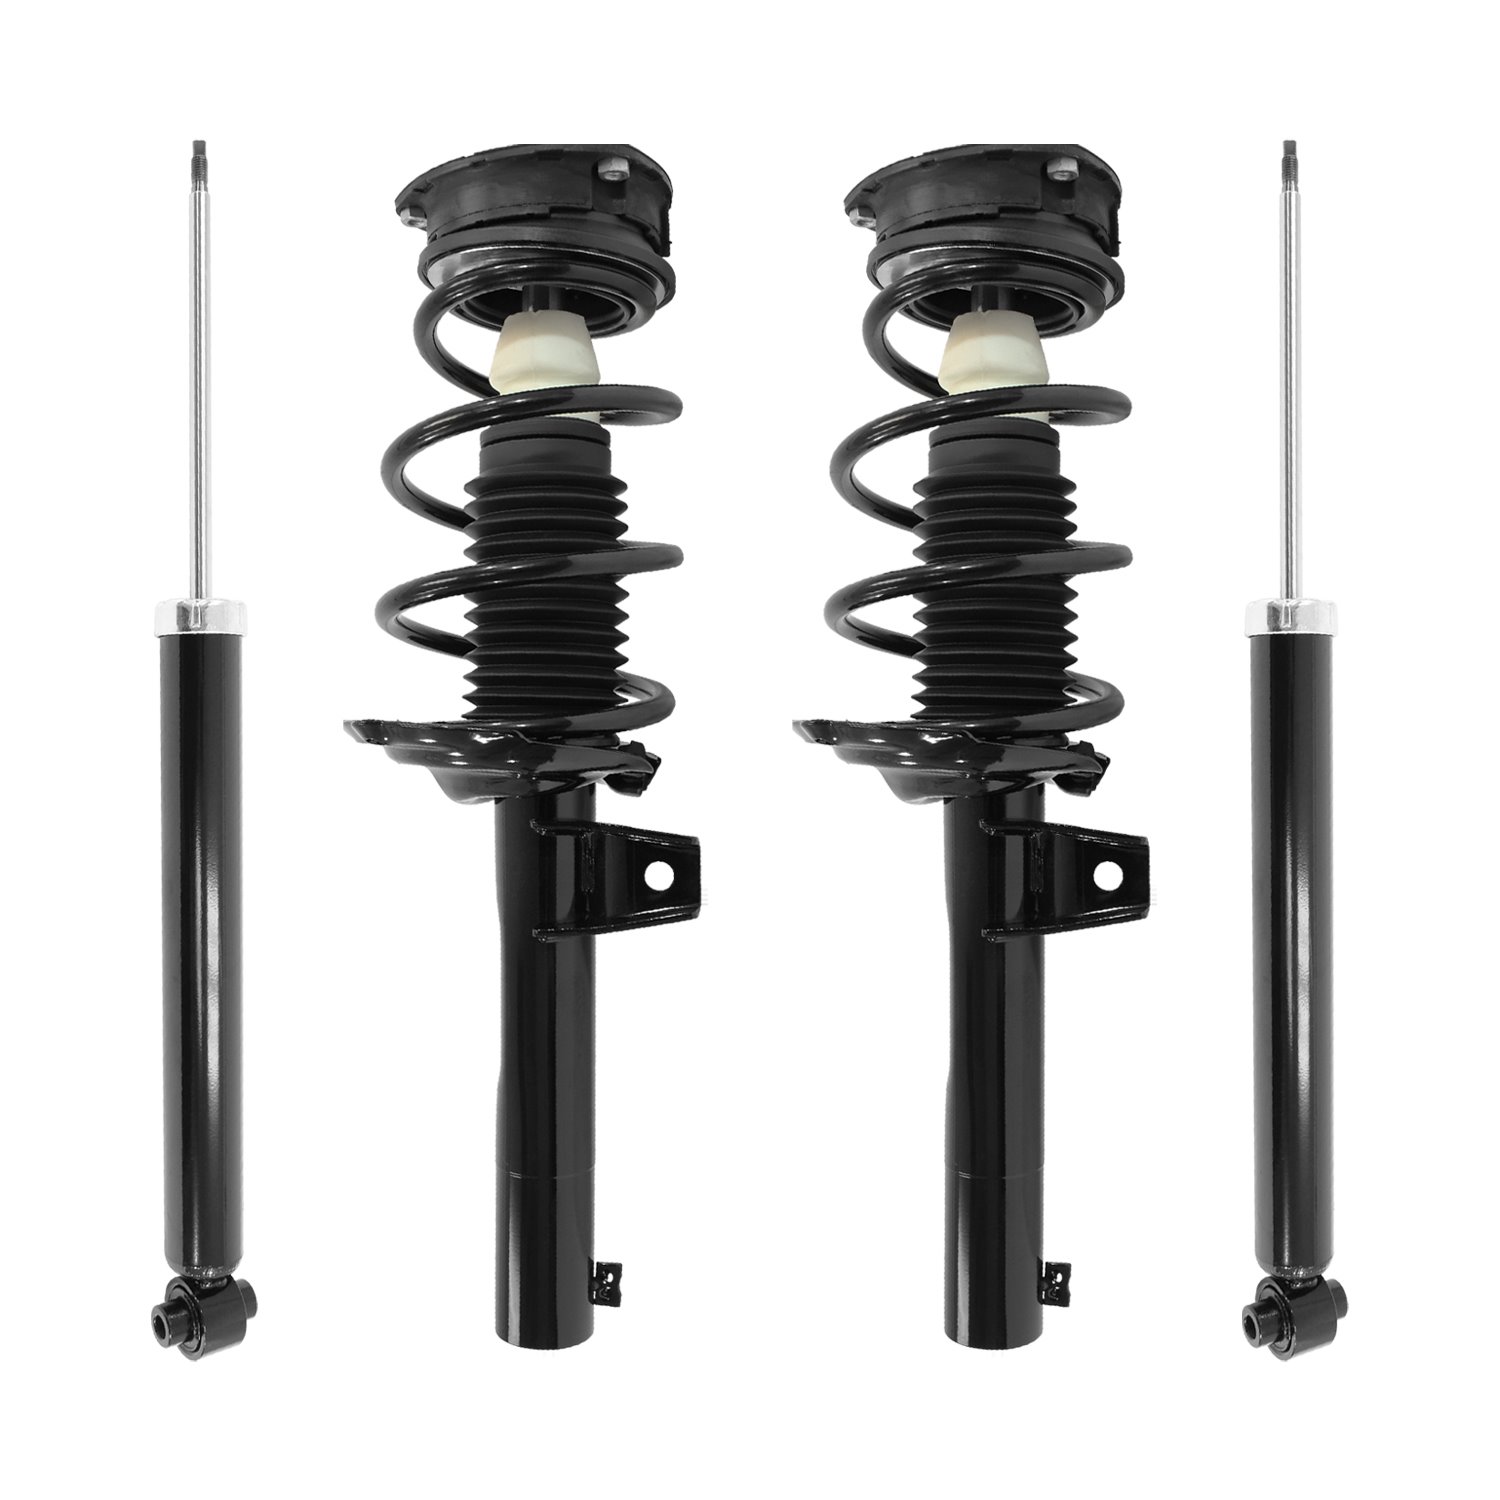 4-13290-257180-001 Front & Rear Complete Strut Assembly Shock Absorber Kit Fits Select Audi A3 Quattro, Audi A3, Volkswagen Golf